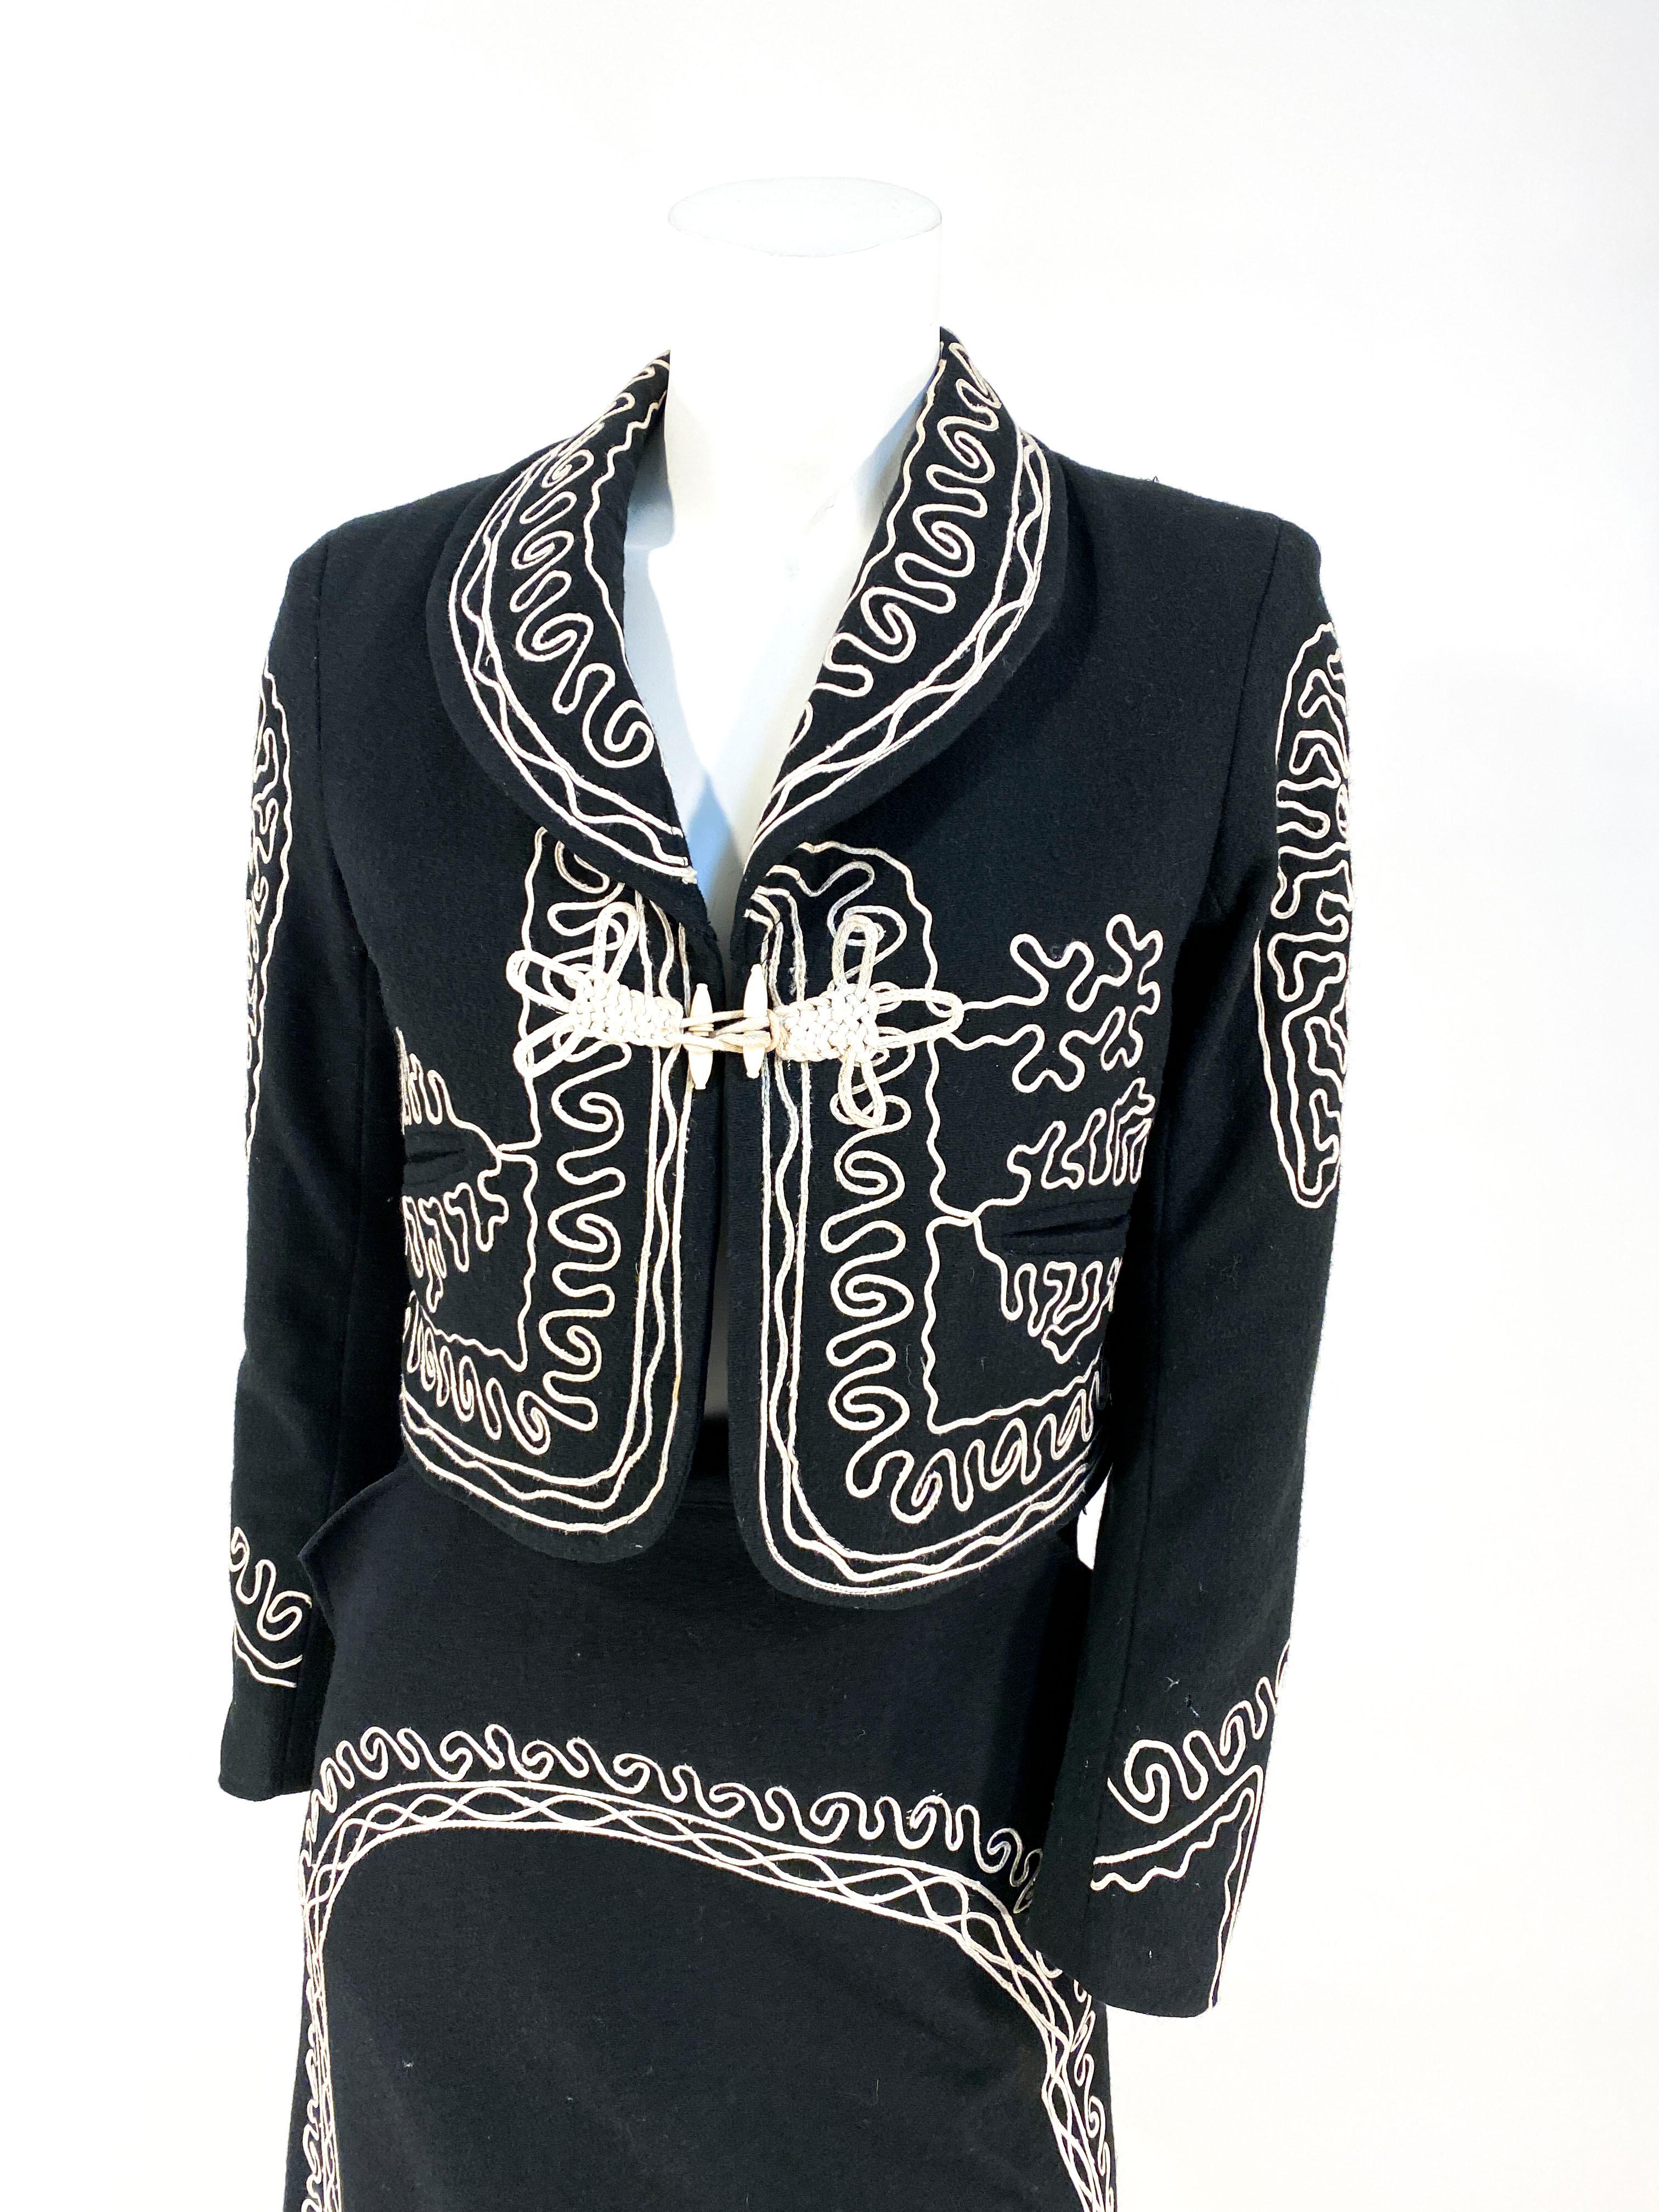 1960s black wool mariachi charro suit with white soutache designs through the jacket and skirt, two hand pockets at the waist of the skirt, full lining and handmade frog closure. 